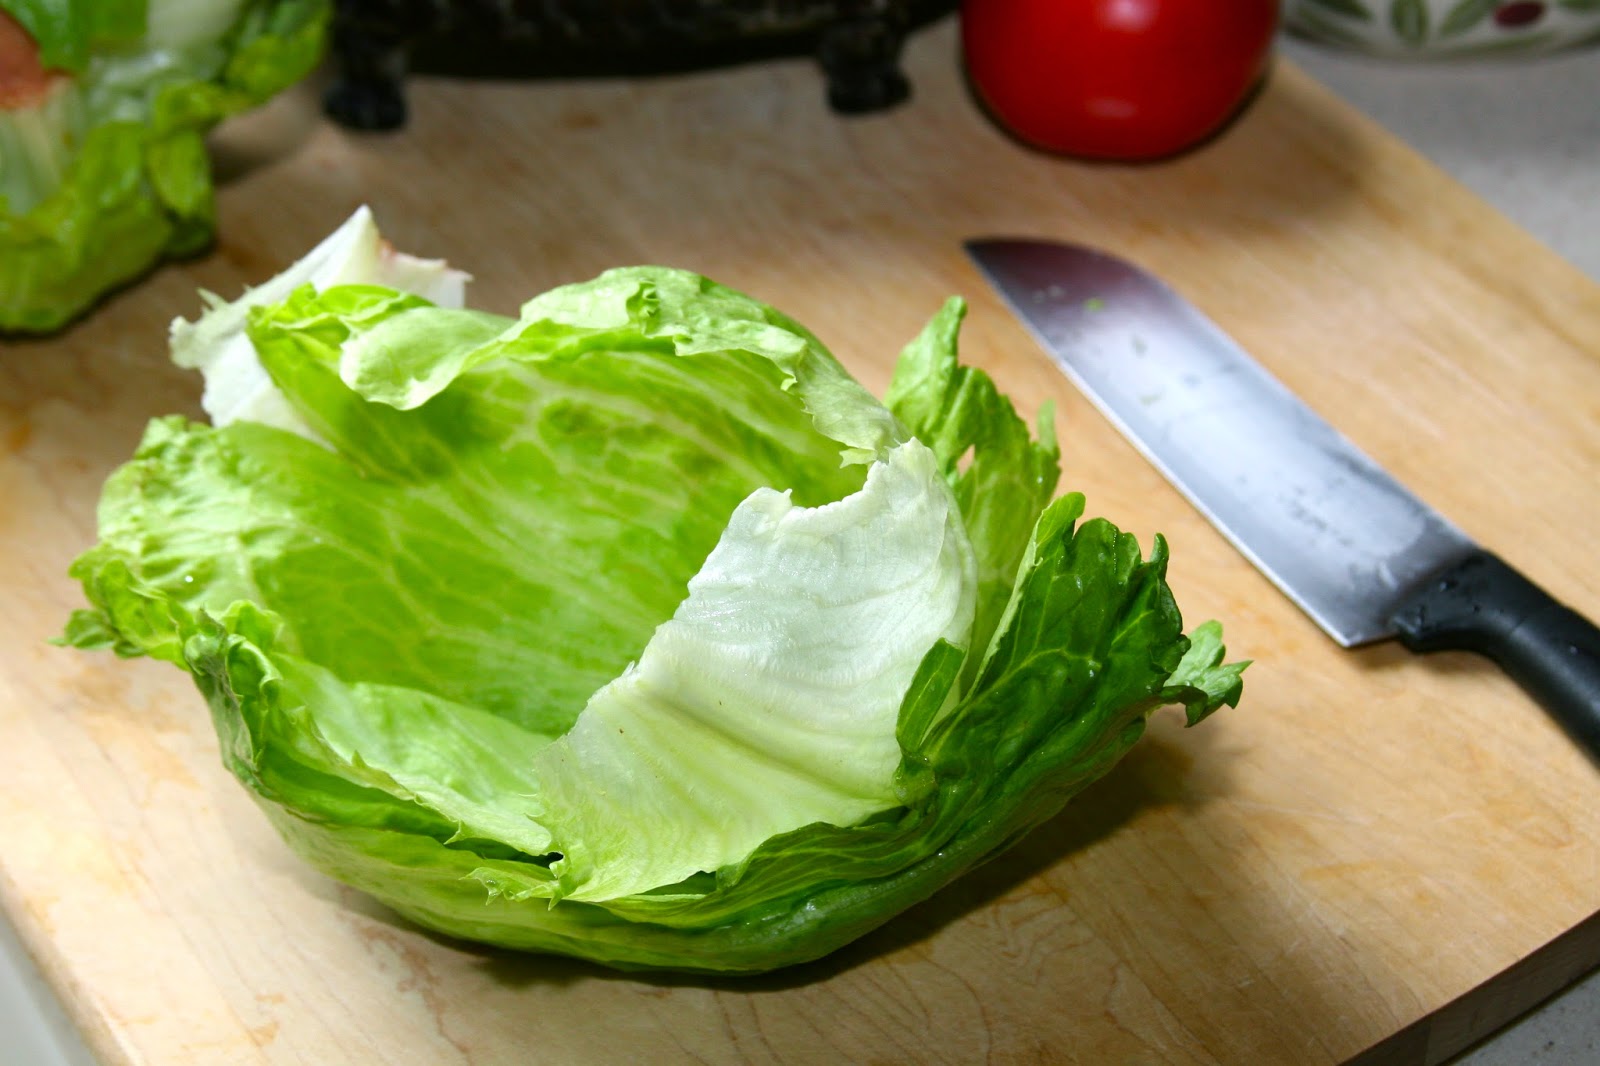 lettuce and other condiments